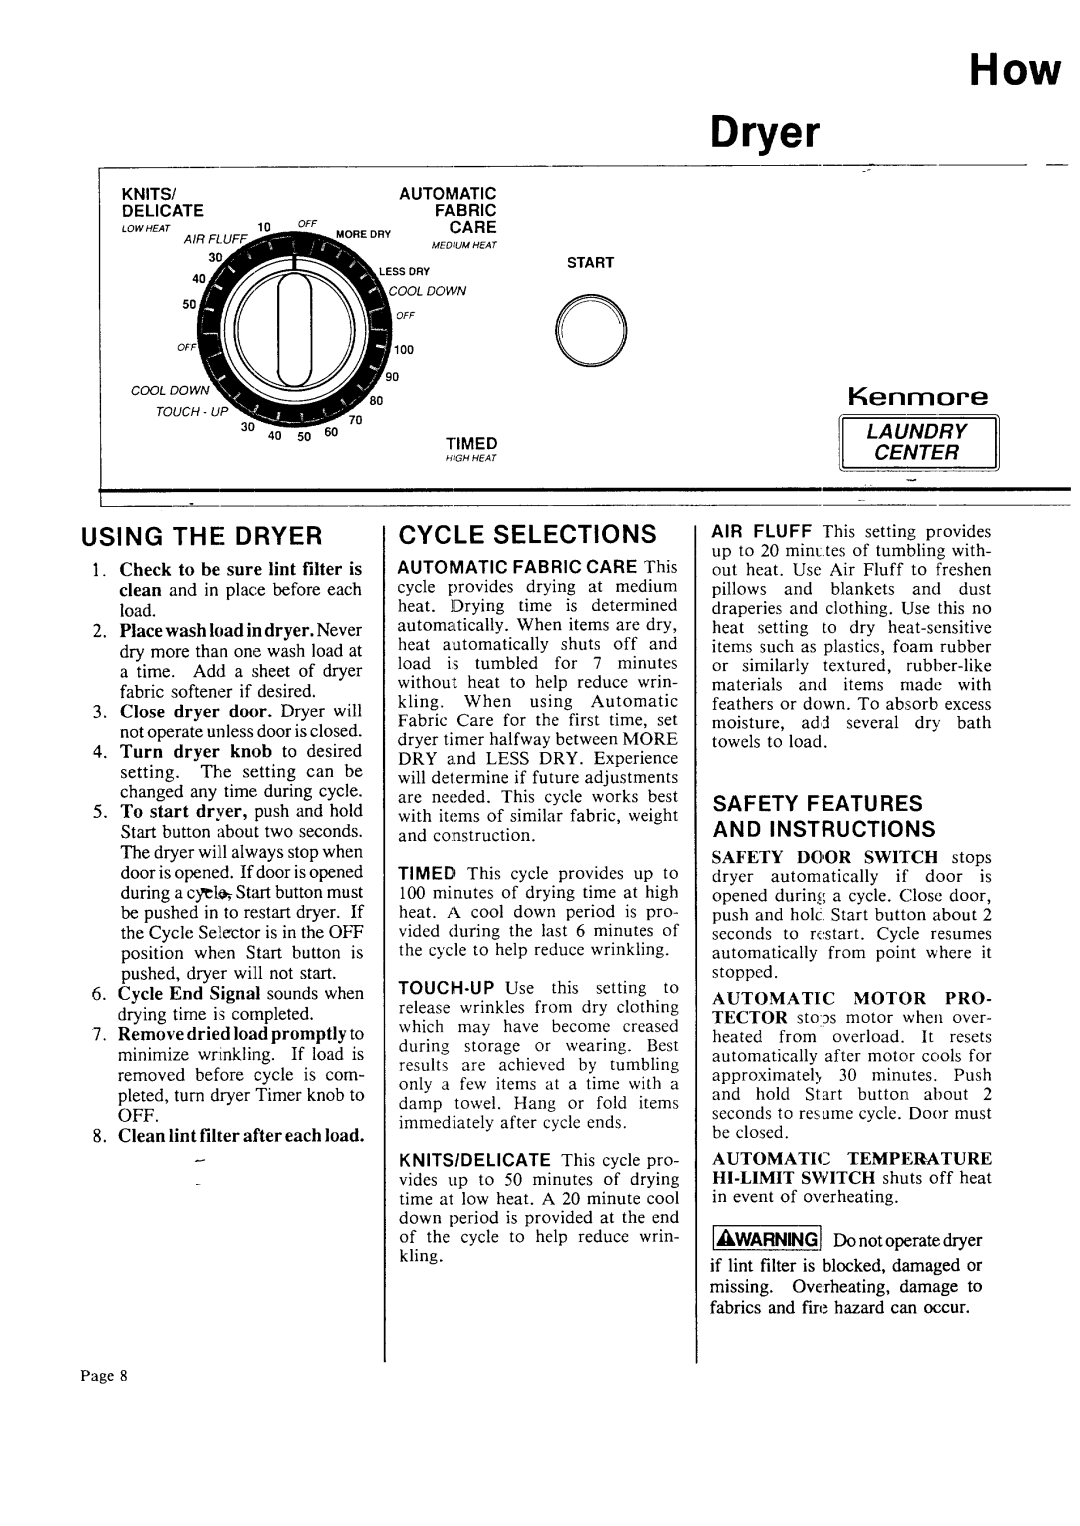 Sears 93701 Using The Dryer, Cycle Selections, 14enmore, Safety Features And Instructions, Knits, Automatic, Delicate 